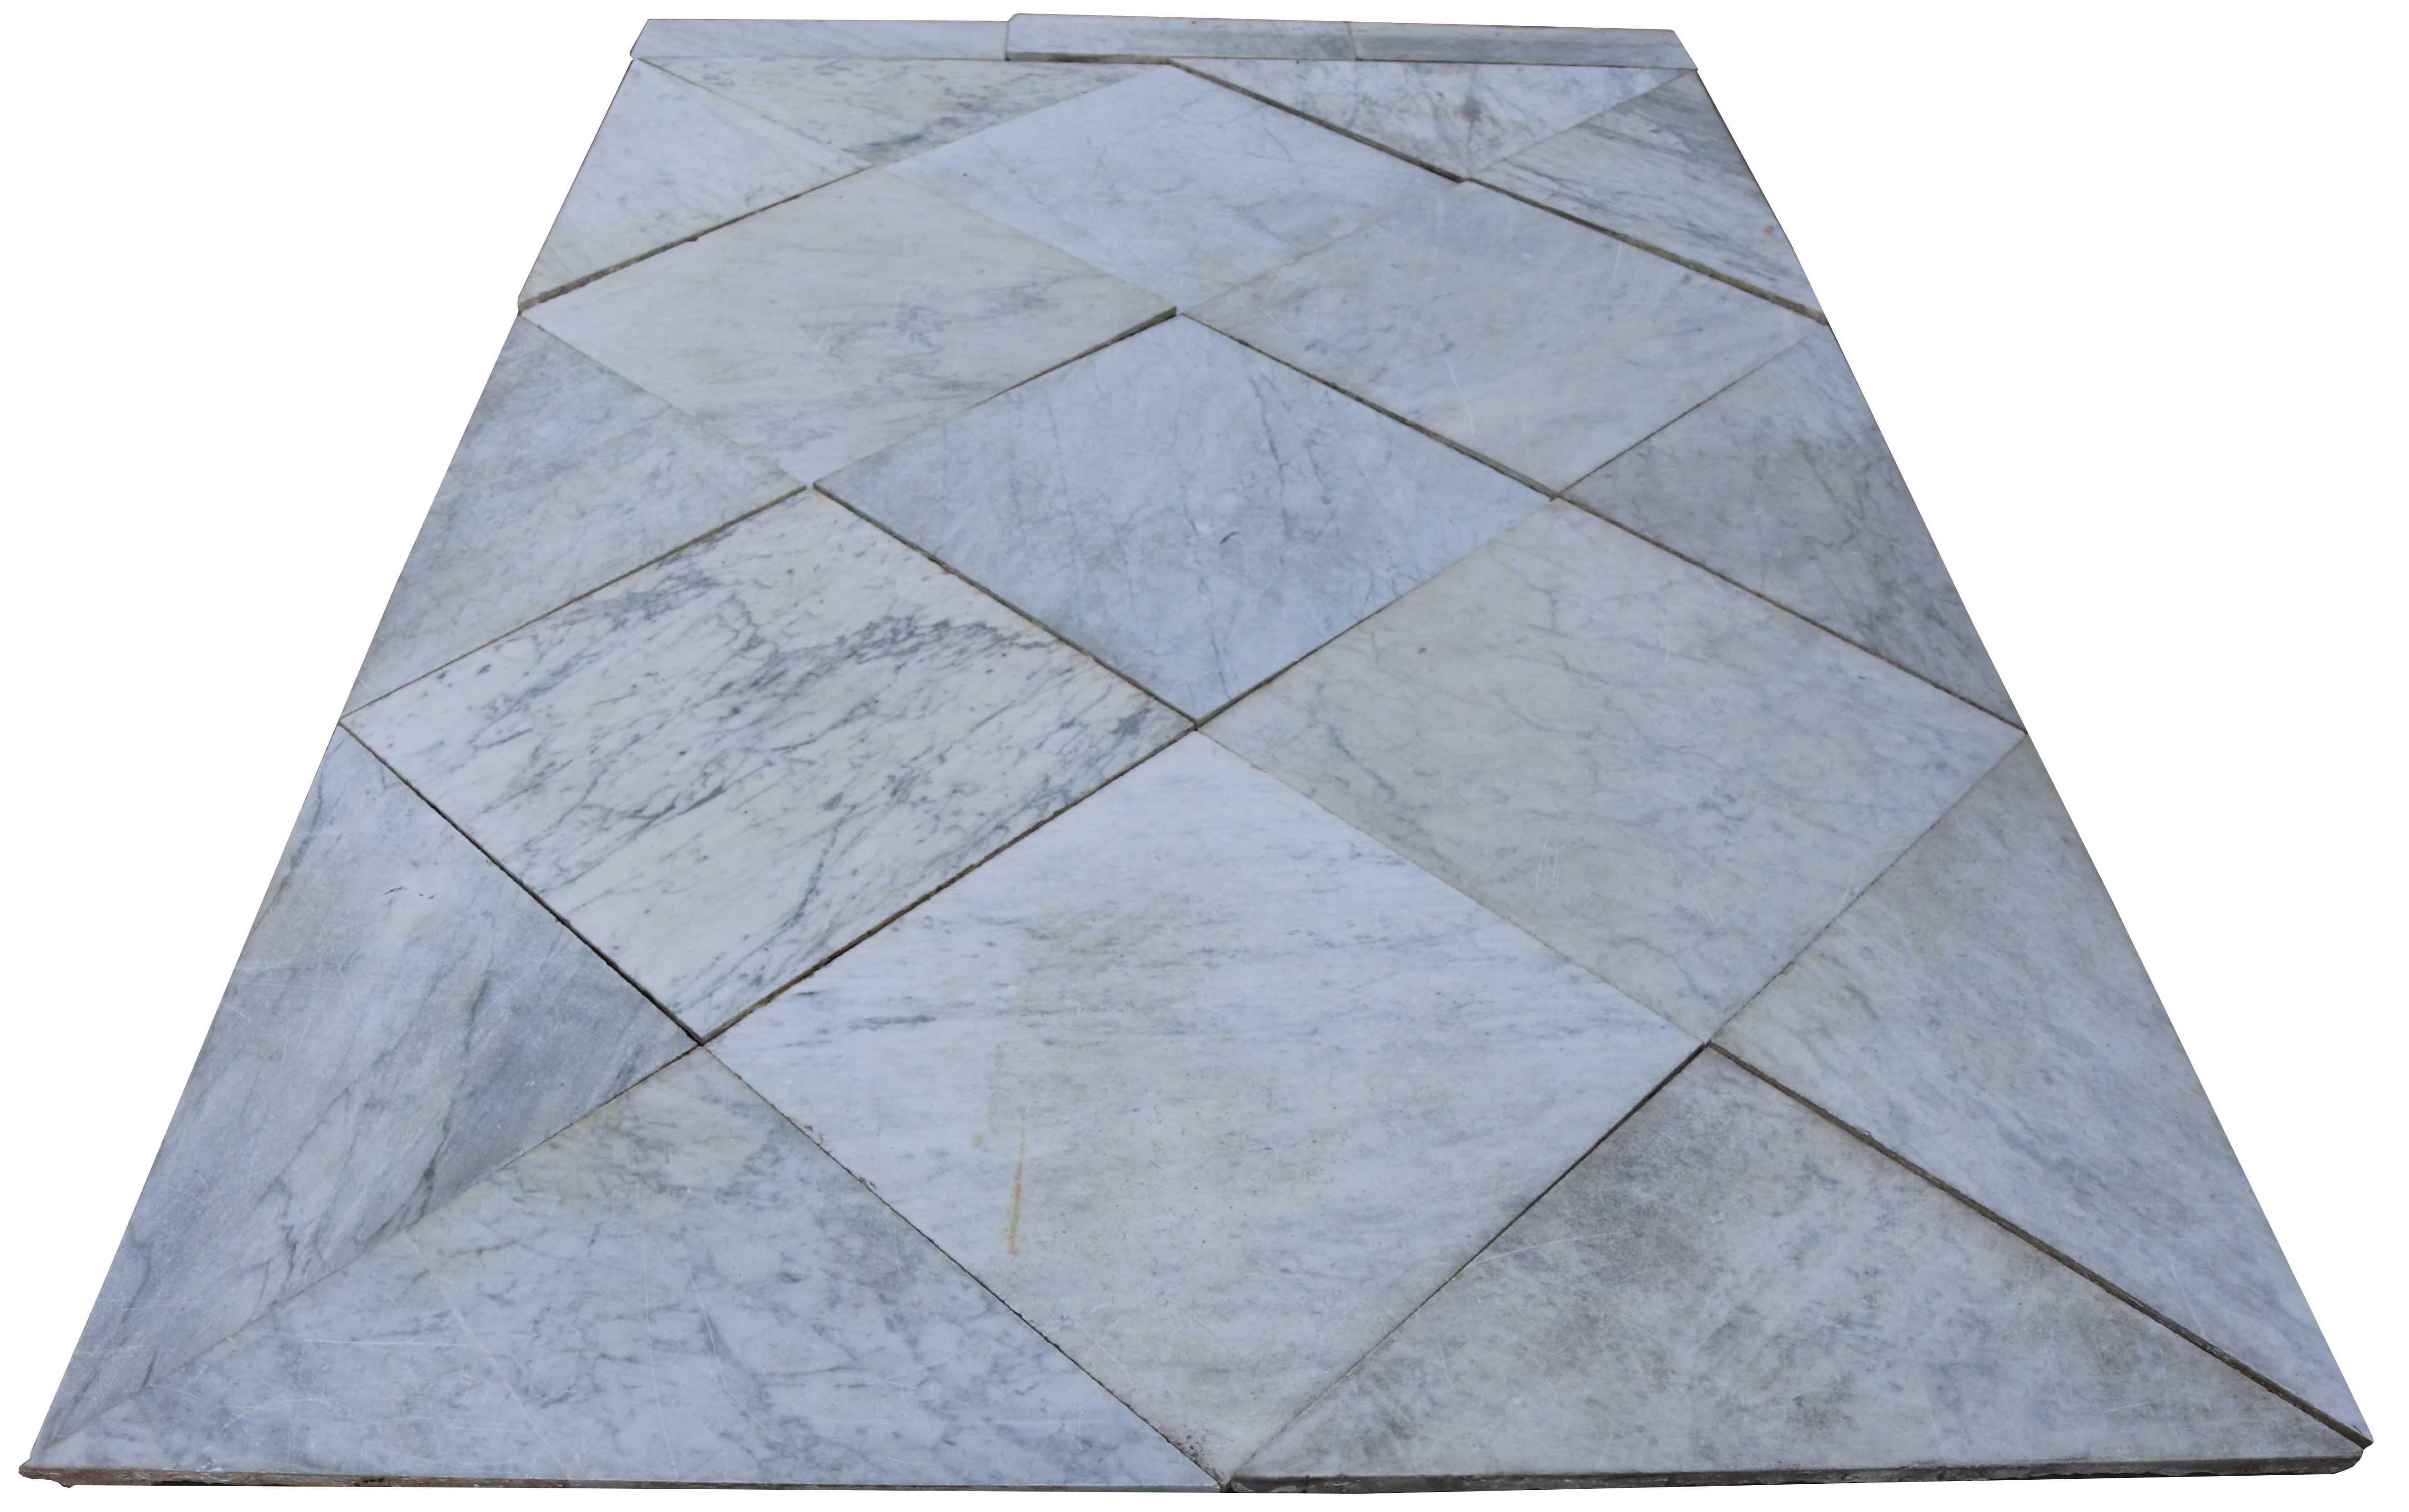 About

This very rare Georgian period marble floor was reclaimed from a Norfolk Estate. The tiles shown have been washed.

Available as one lot. £ 260 m2

Condition report

This lot consists of two sizes of tile, the majority being 62.5 cm